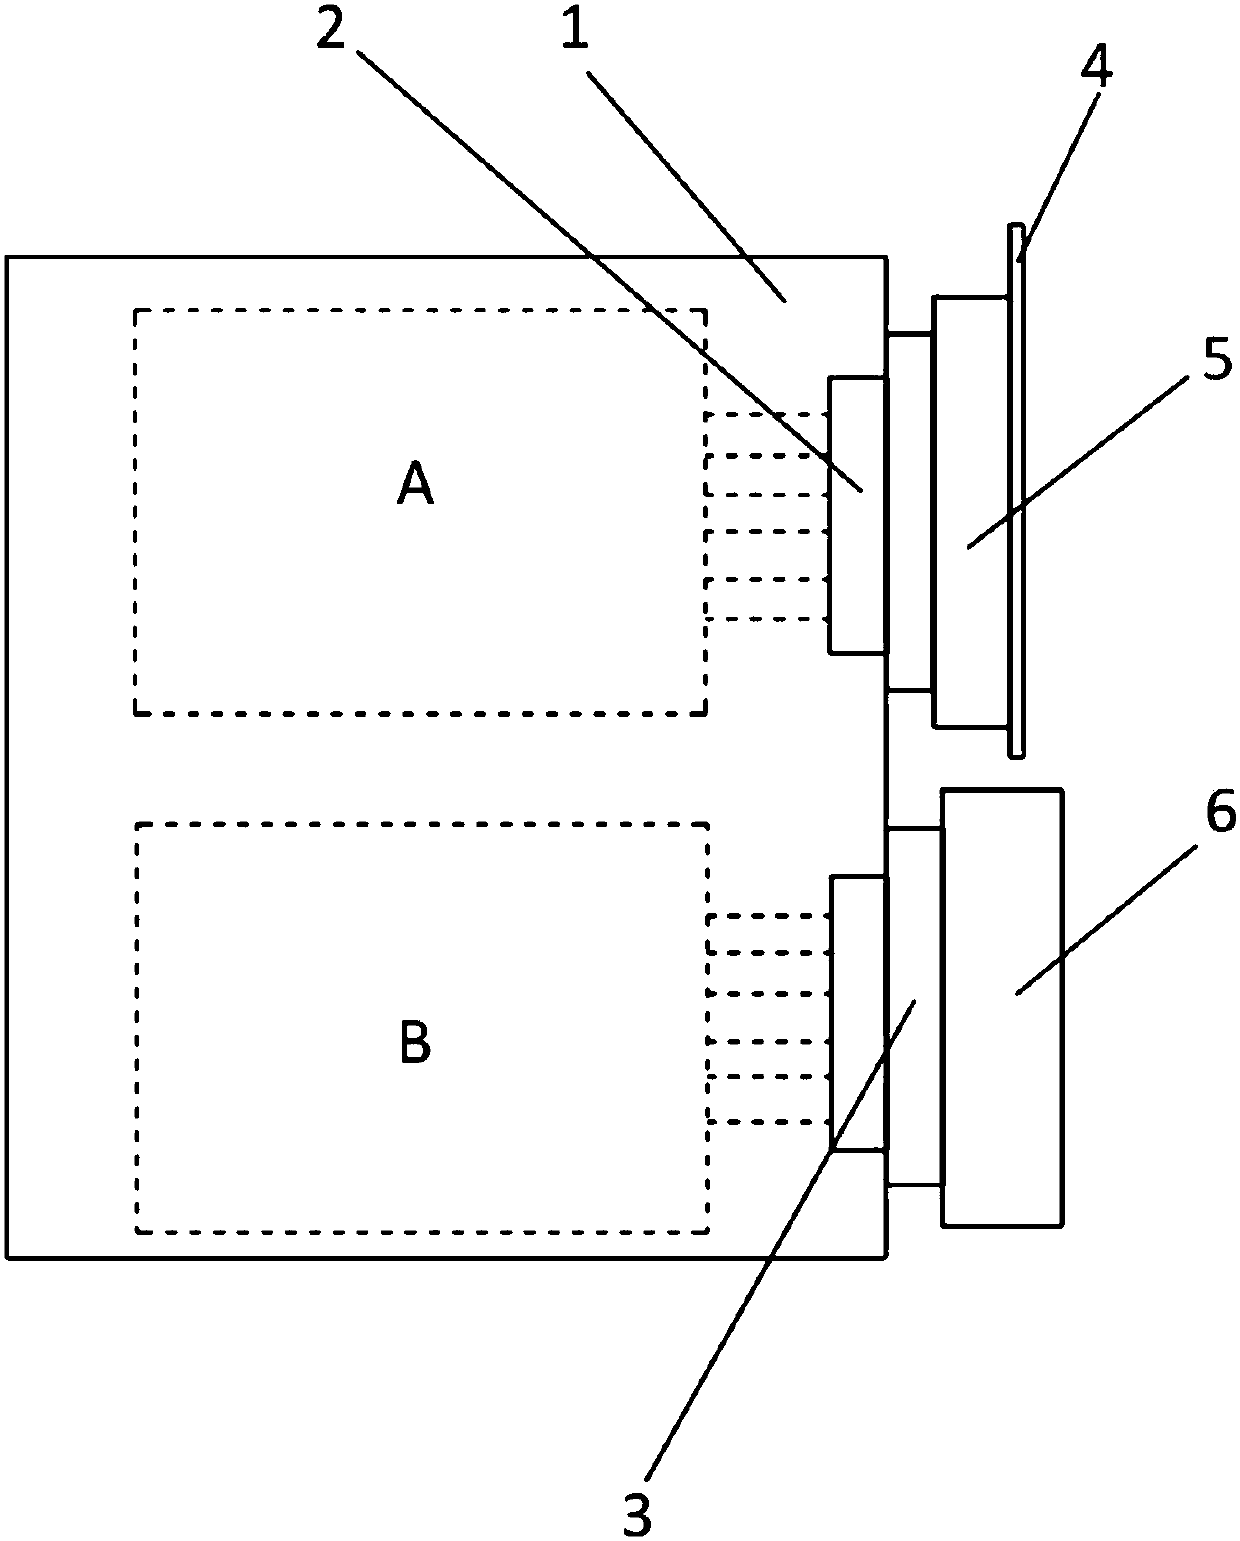 Resistance interference prevention method between circuit boards